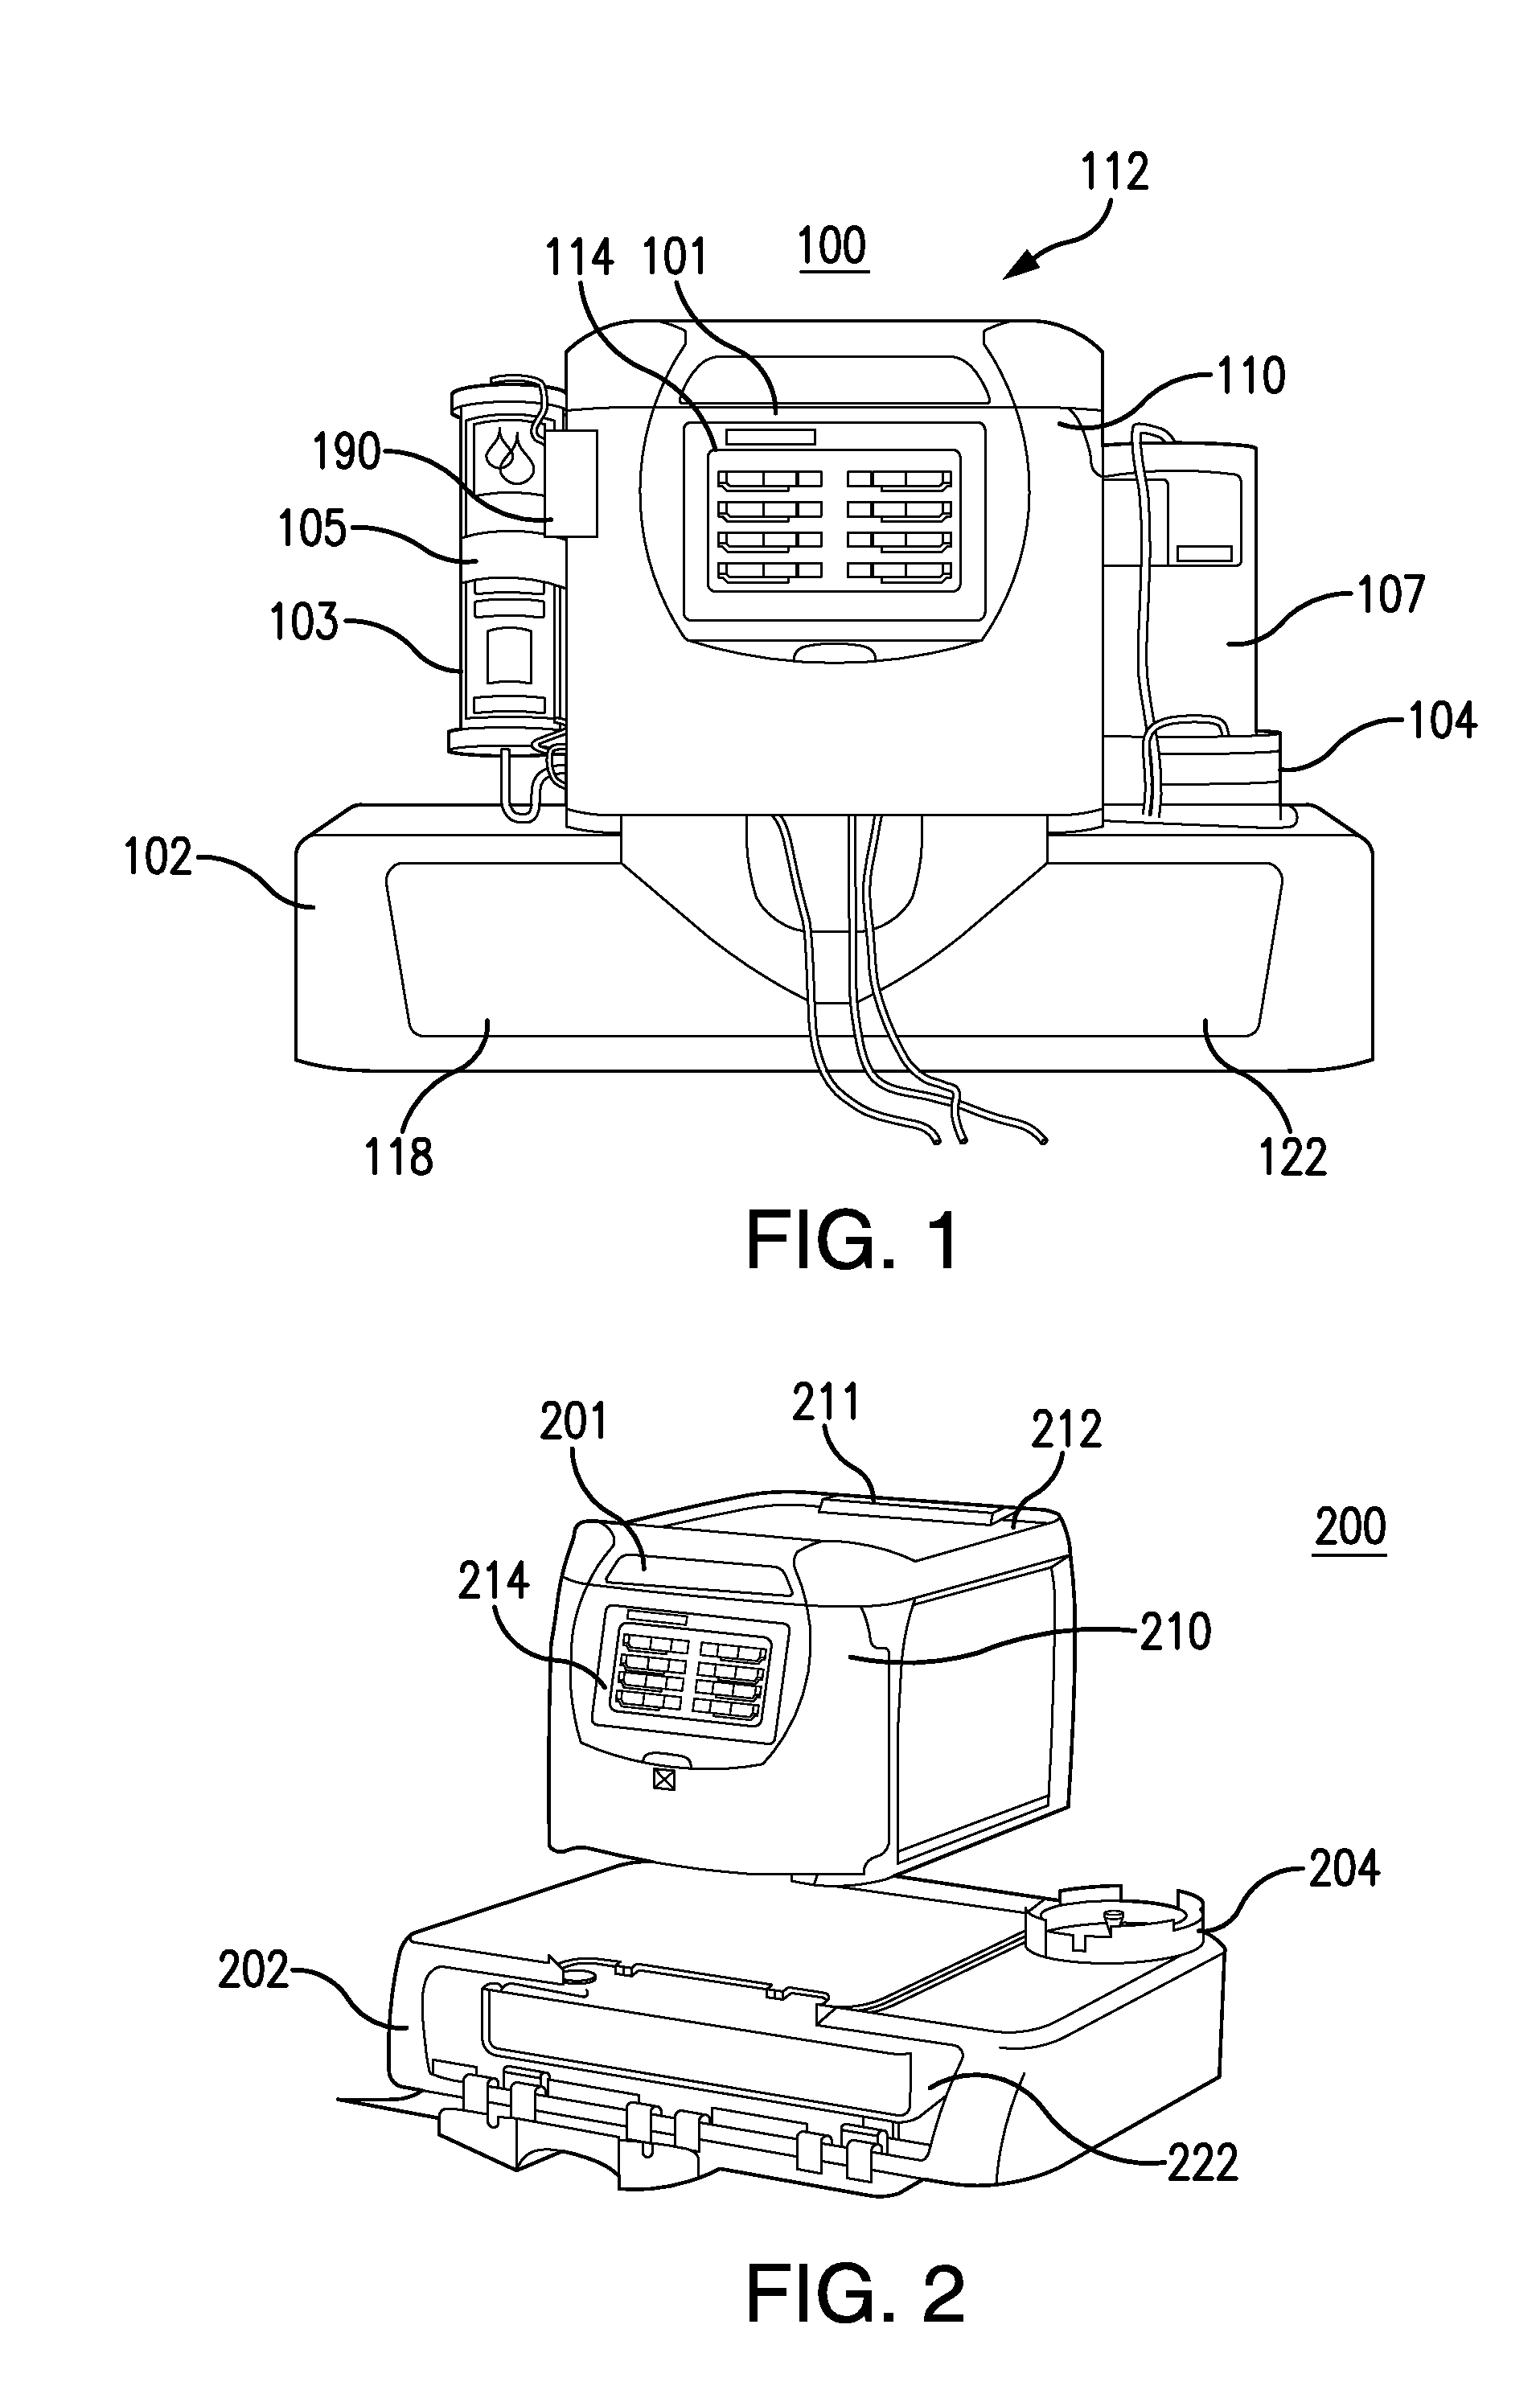 Universal portable machine for online hemodiafiltration using regenerated dialysate